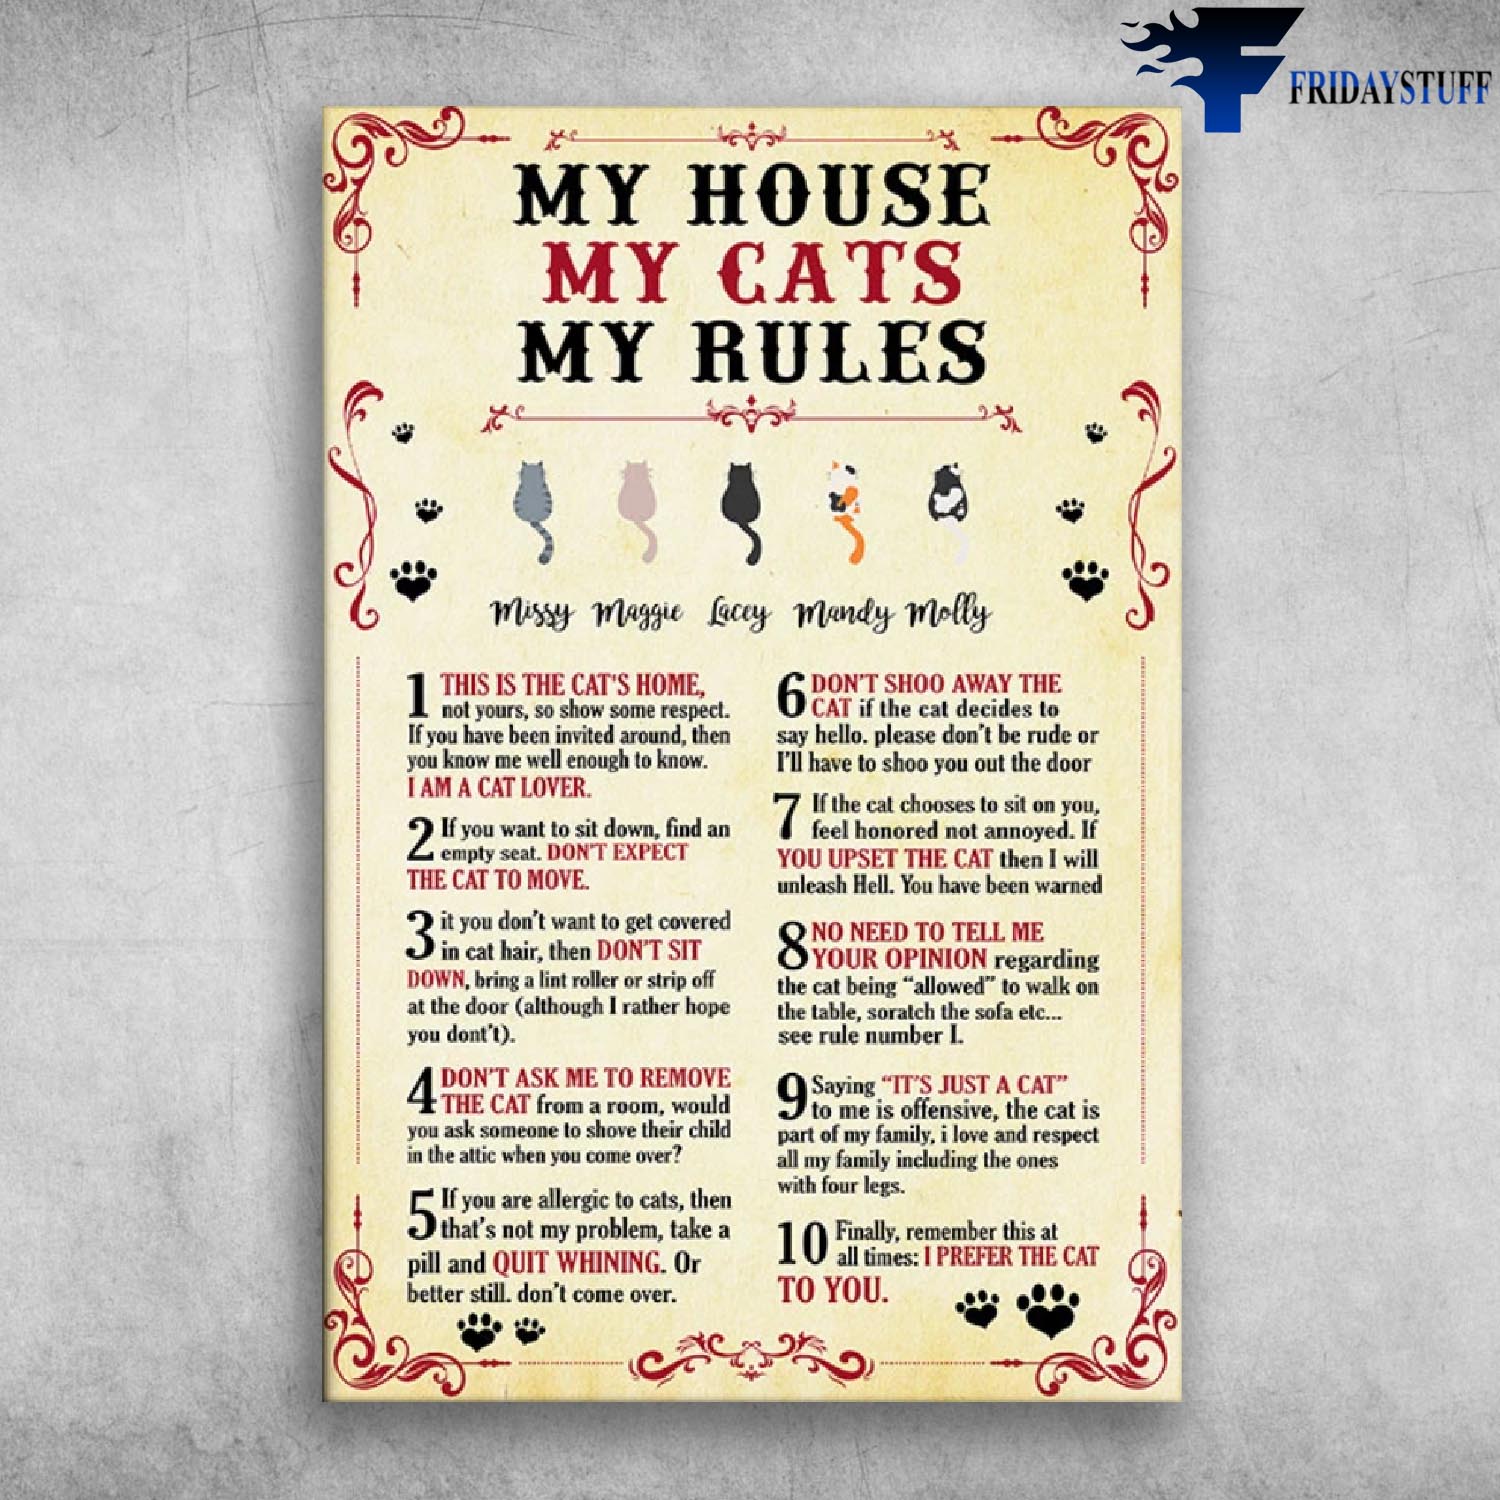 My House My Cats My Rules Missy Maggie Lacey Mandy Molly